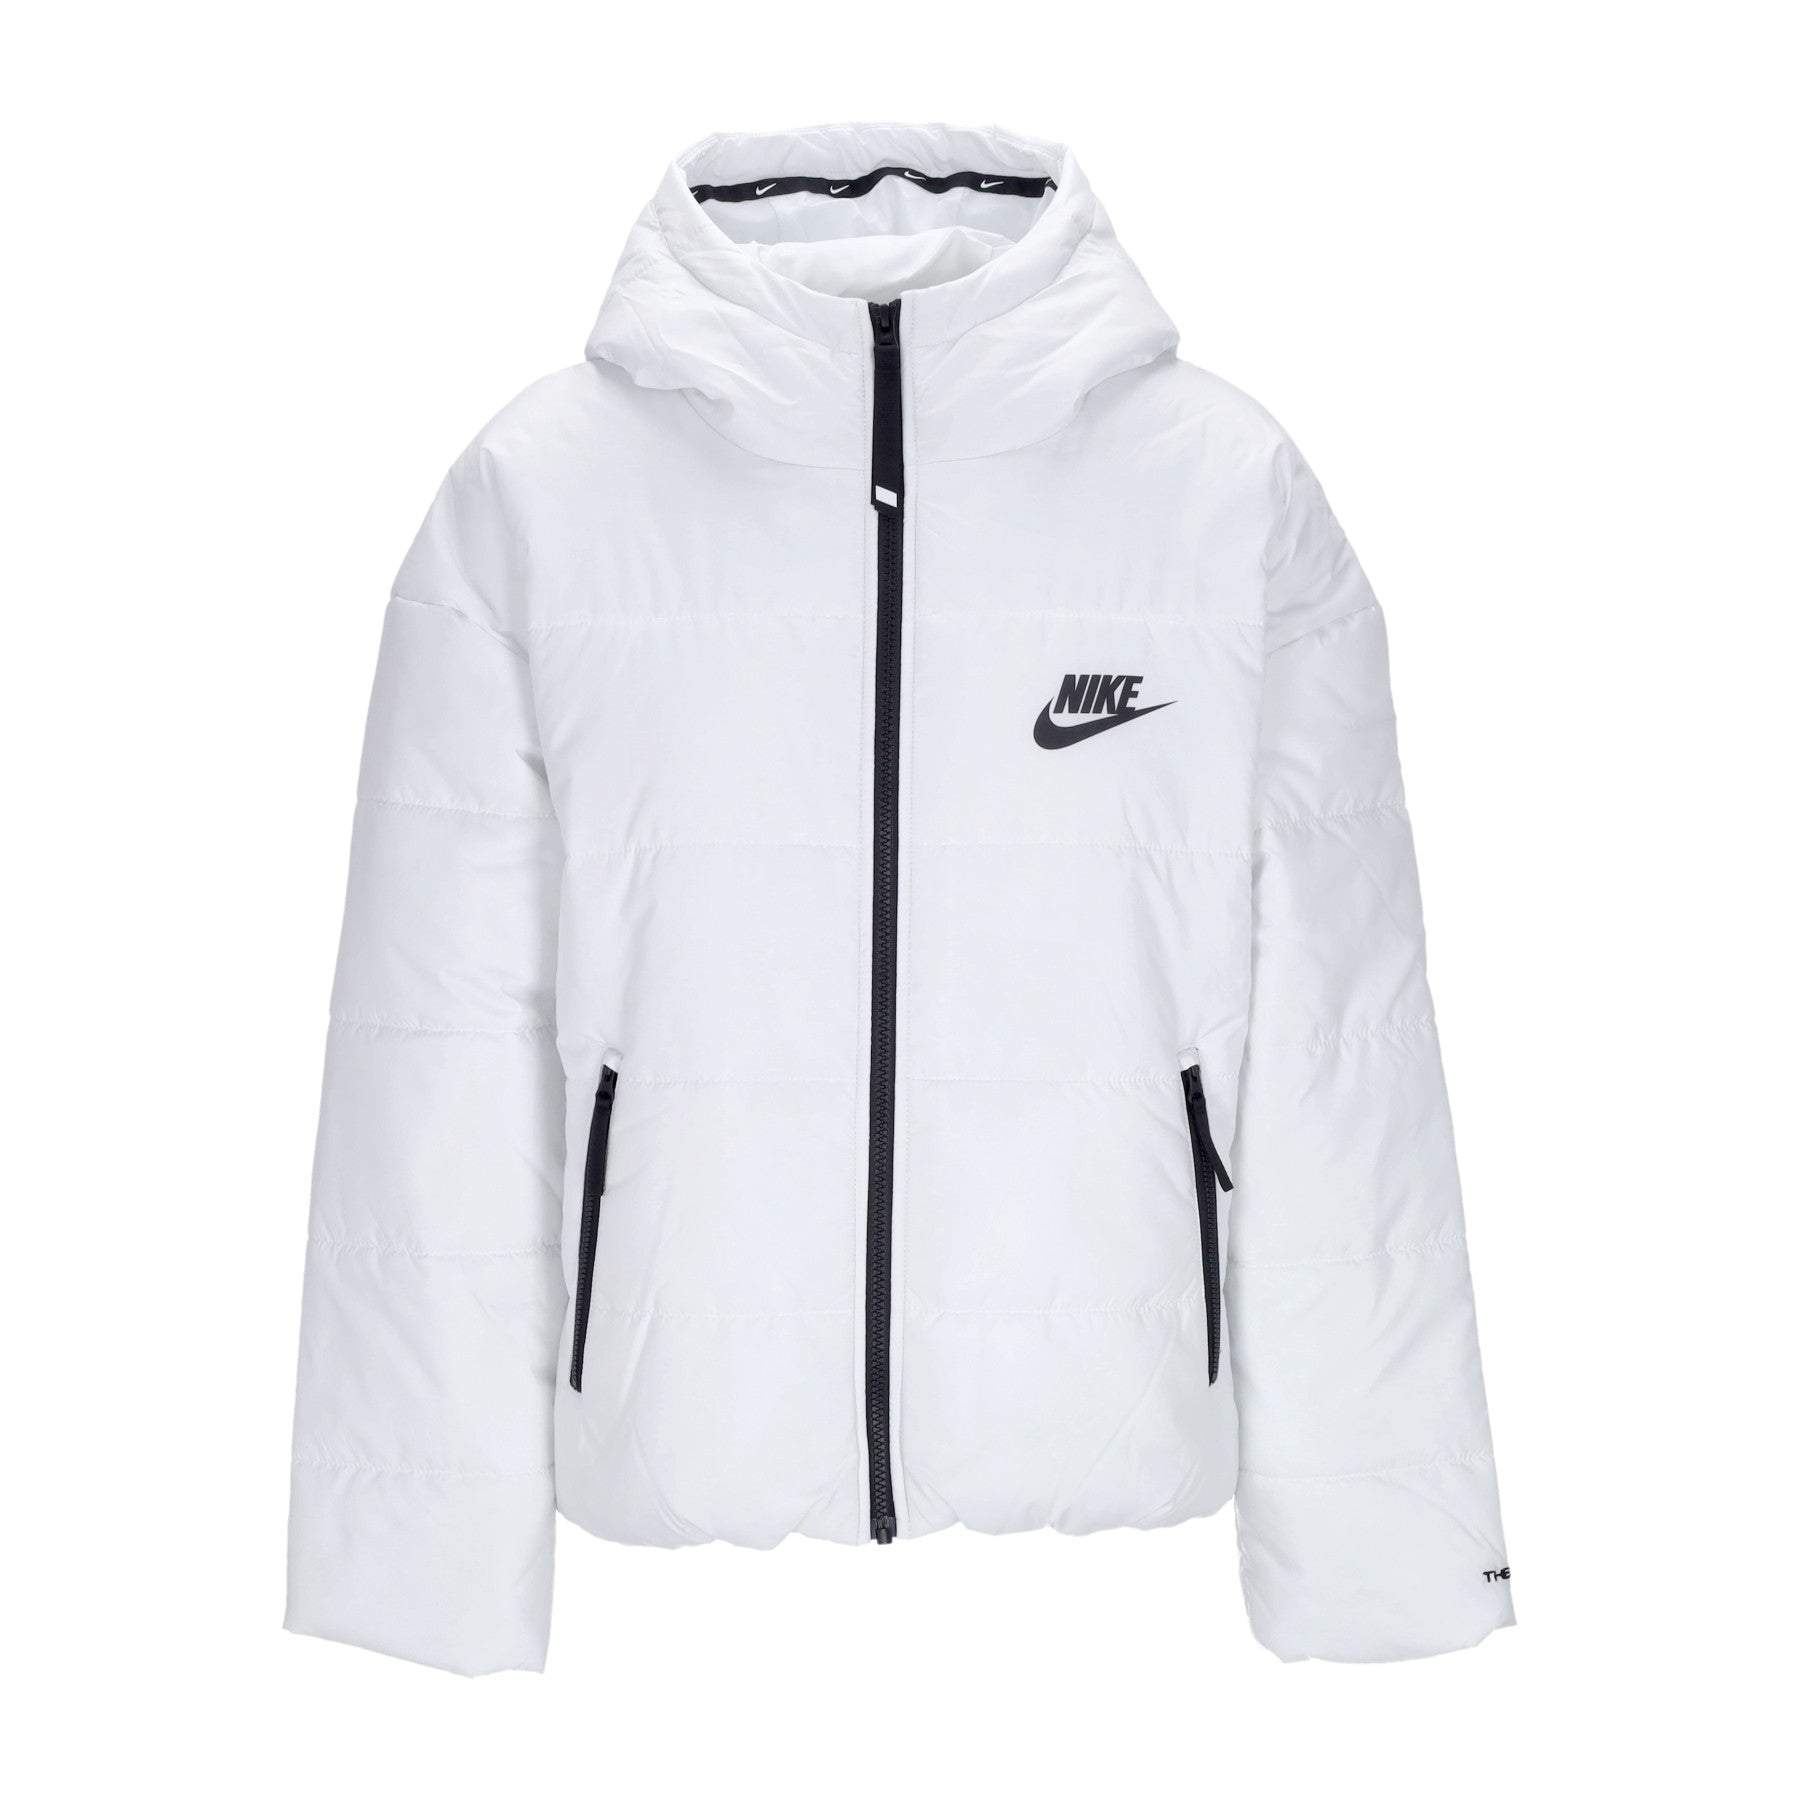 Women's Down Jacket Therma Fit Repel Hooded Jacket Summit White/black/black